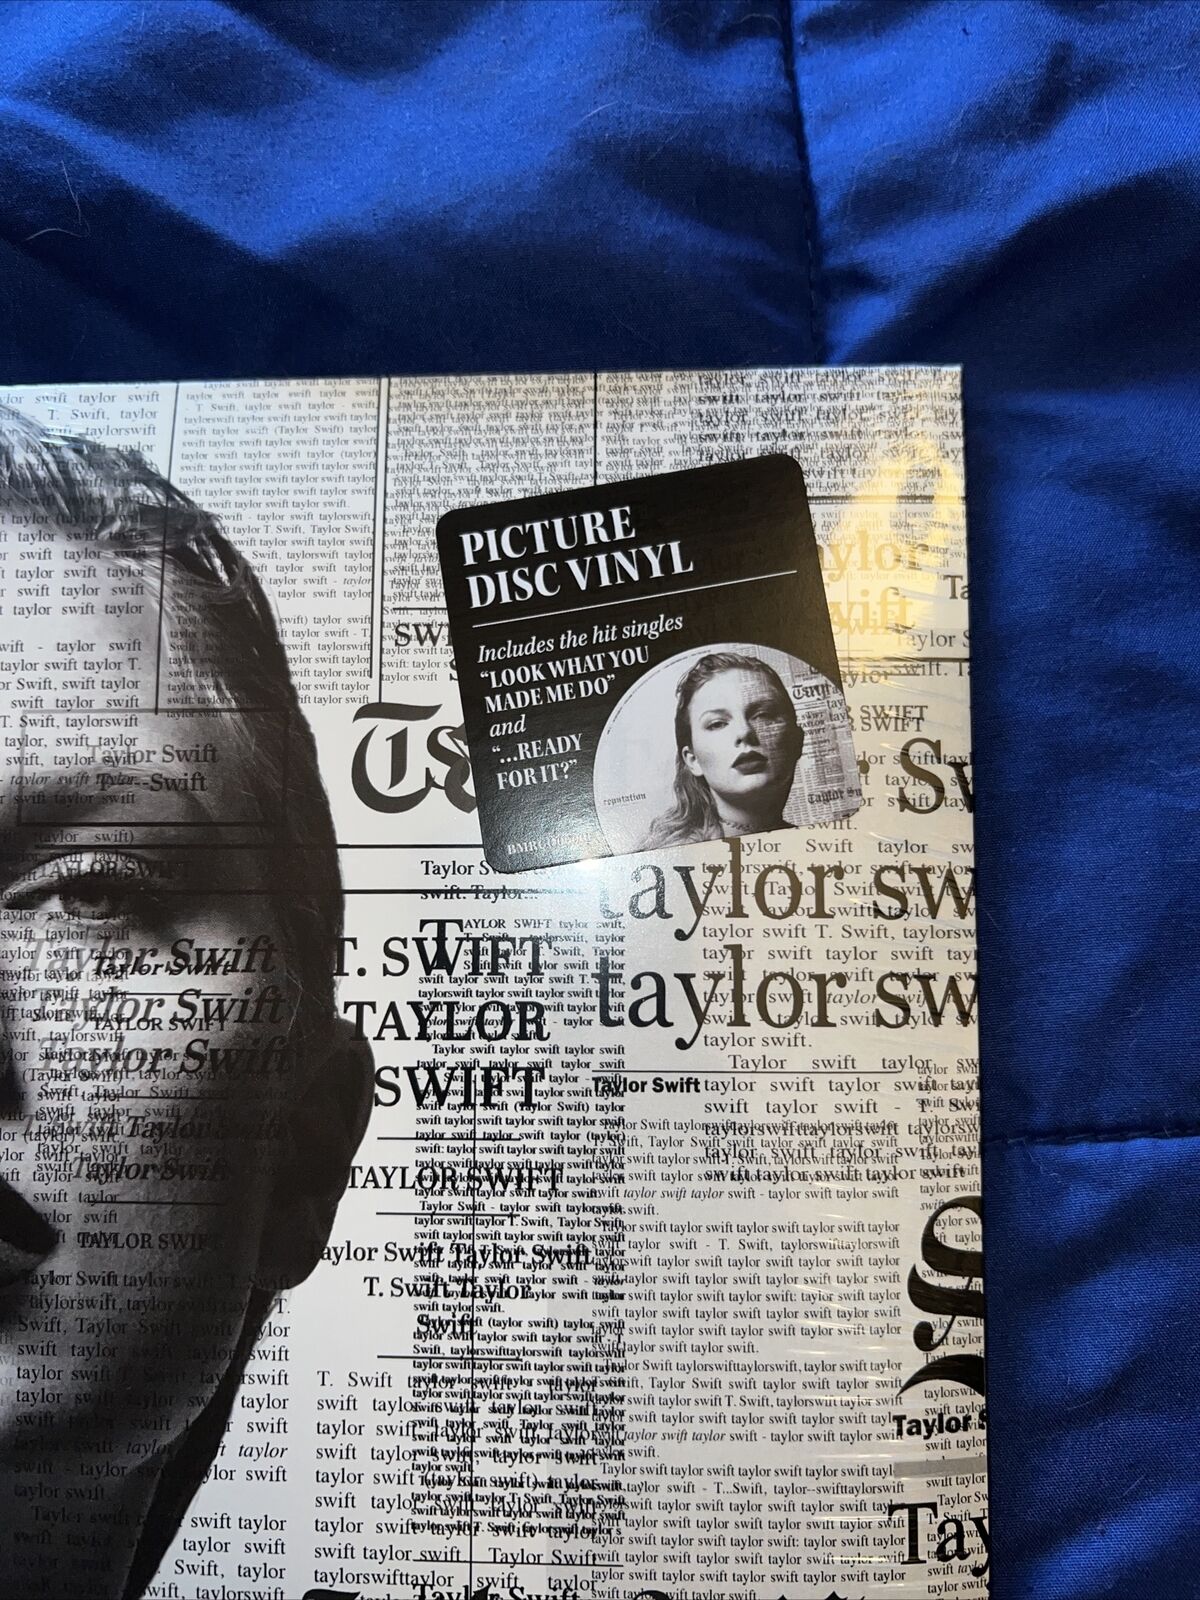 Taylor Swift - Reputation Picture Disc (Record, 2017)